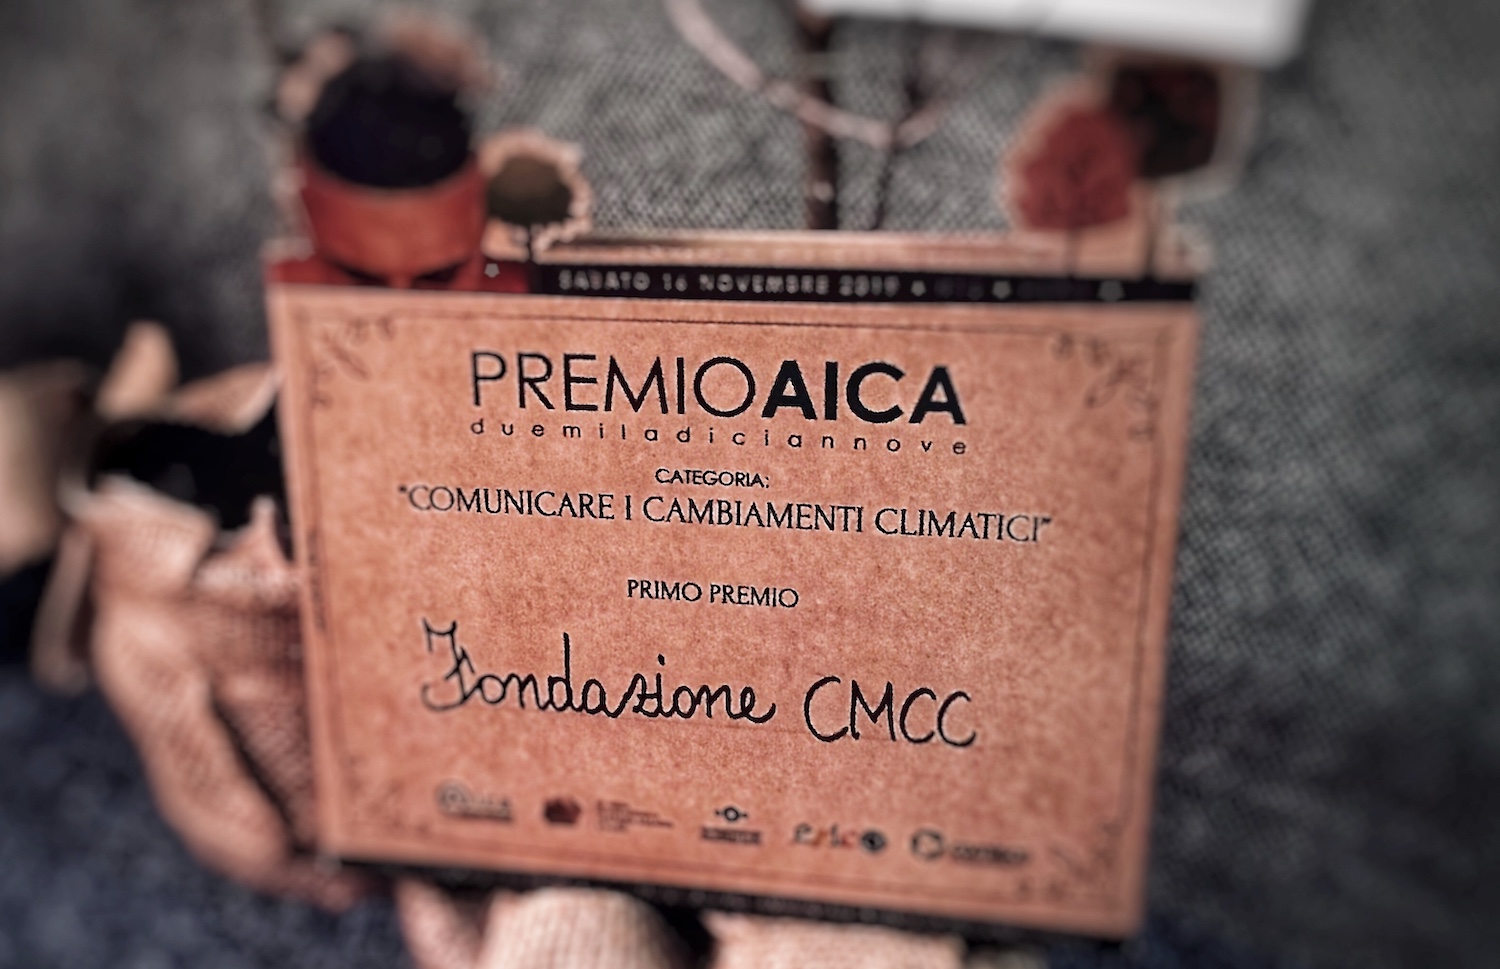 CMCC Foundation awarded with the AICA Environmental Communication Award 2019